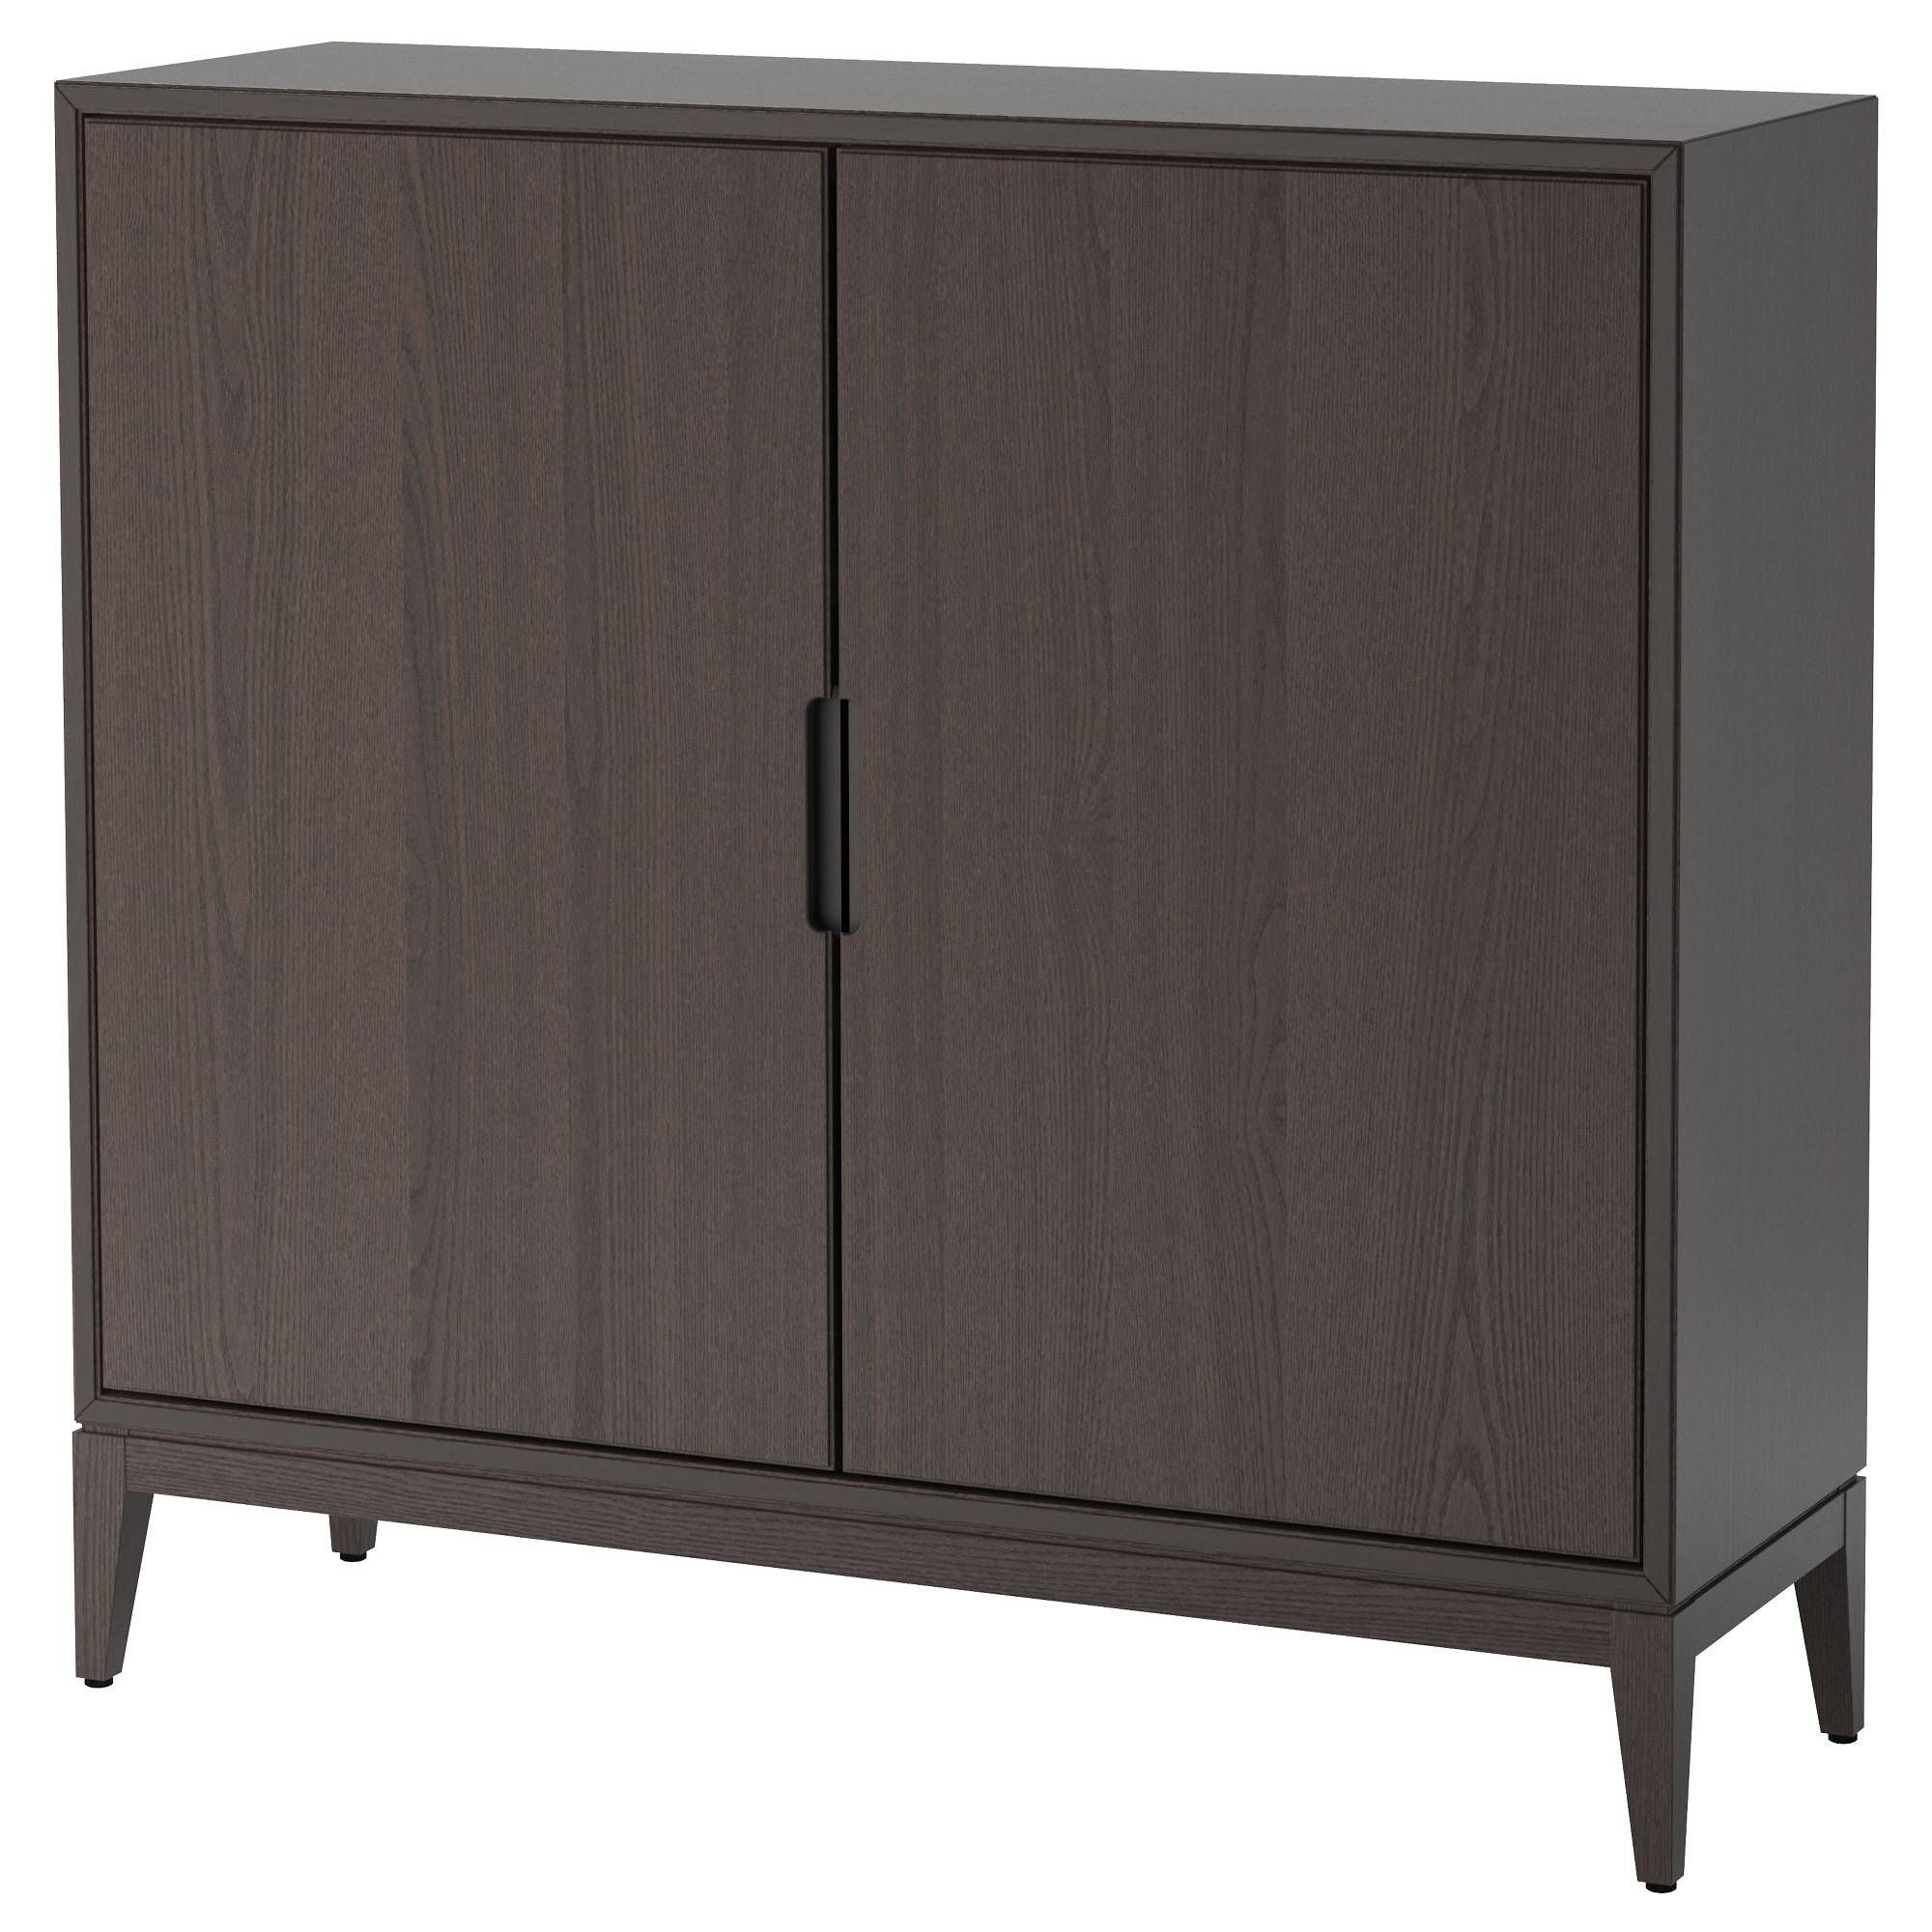 Cabinets & Sideboards – Ikea With Regard To Small Dark Wood Sideboards (View 10 of 15)